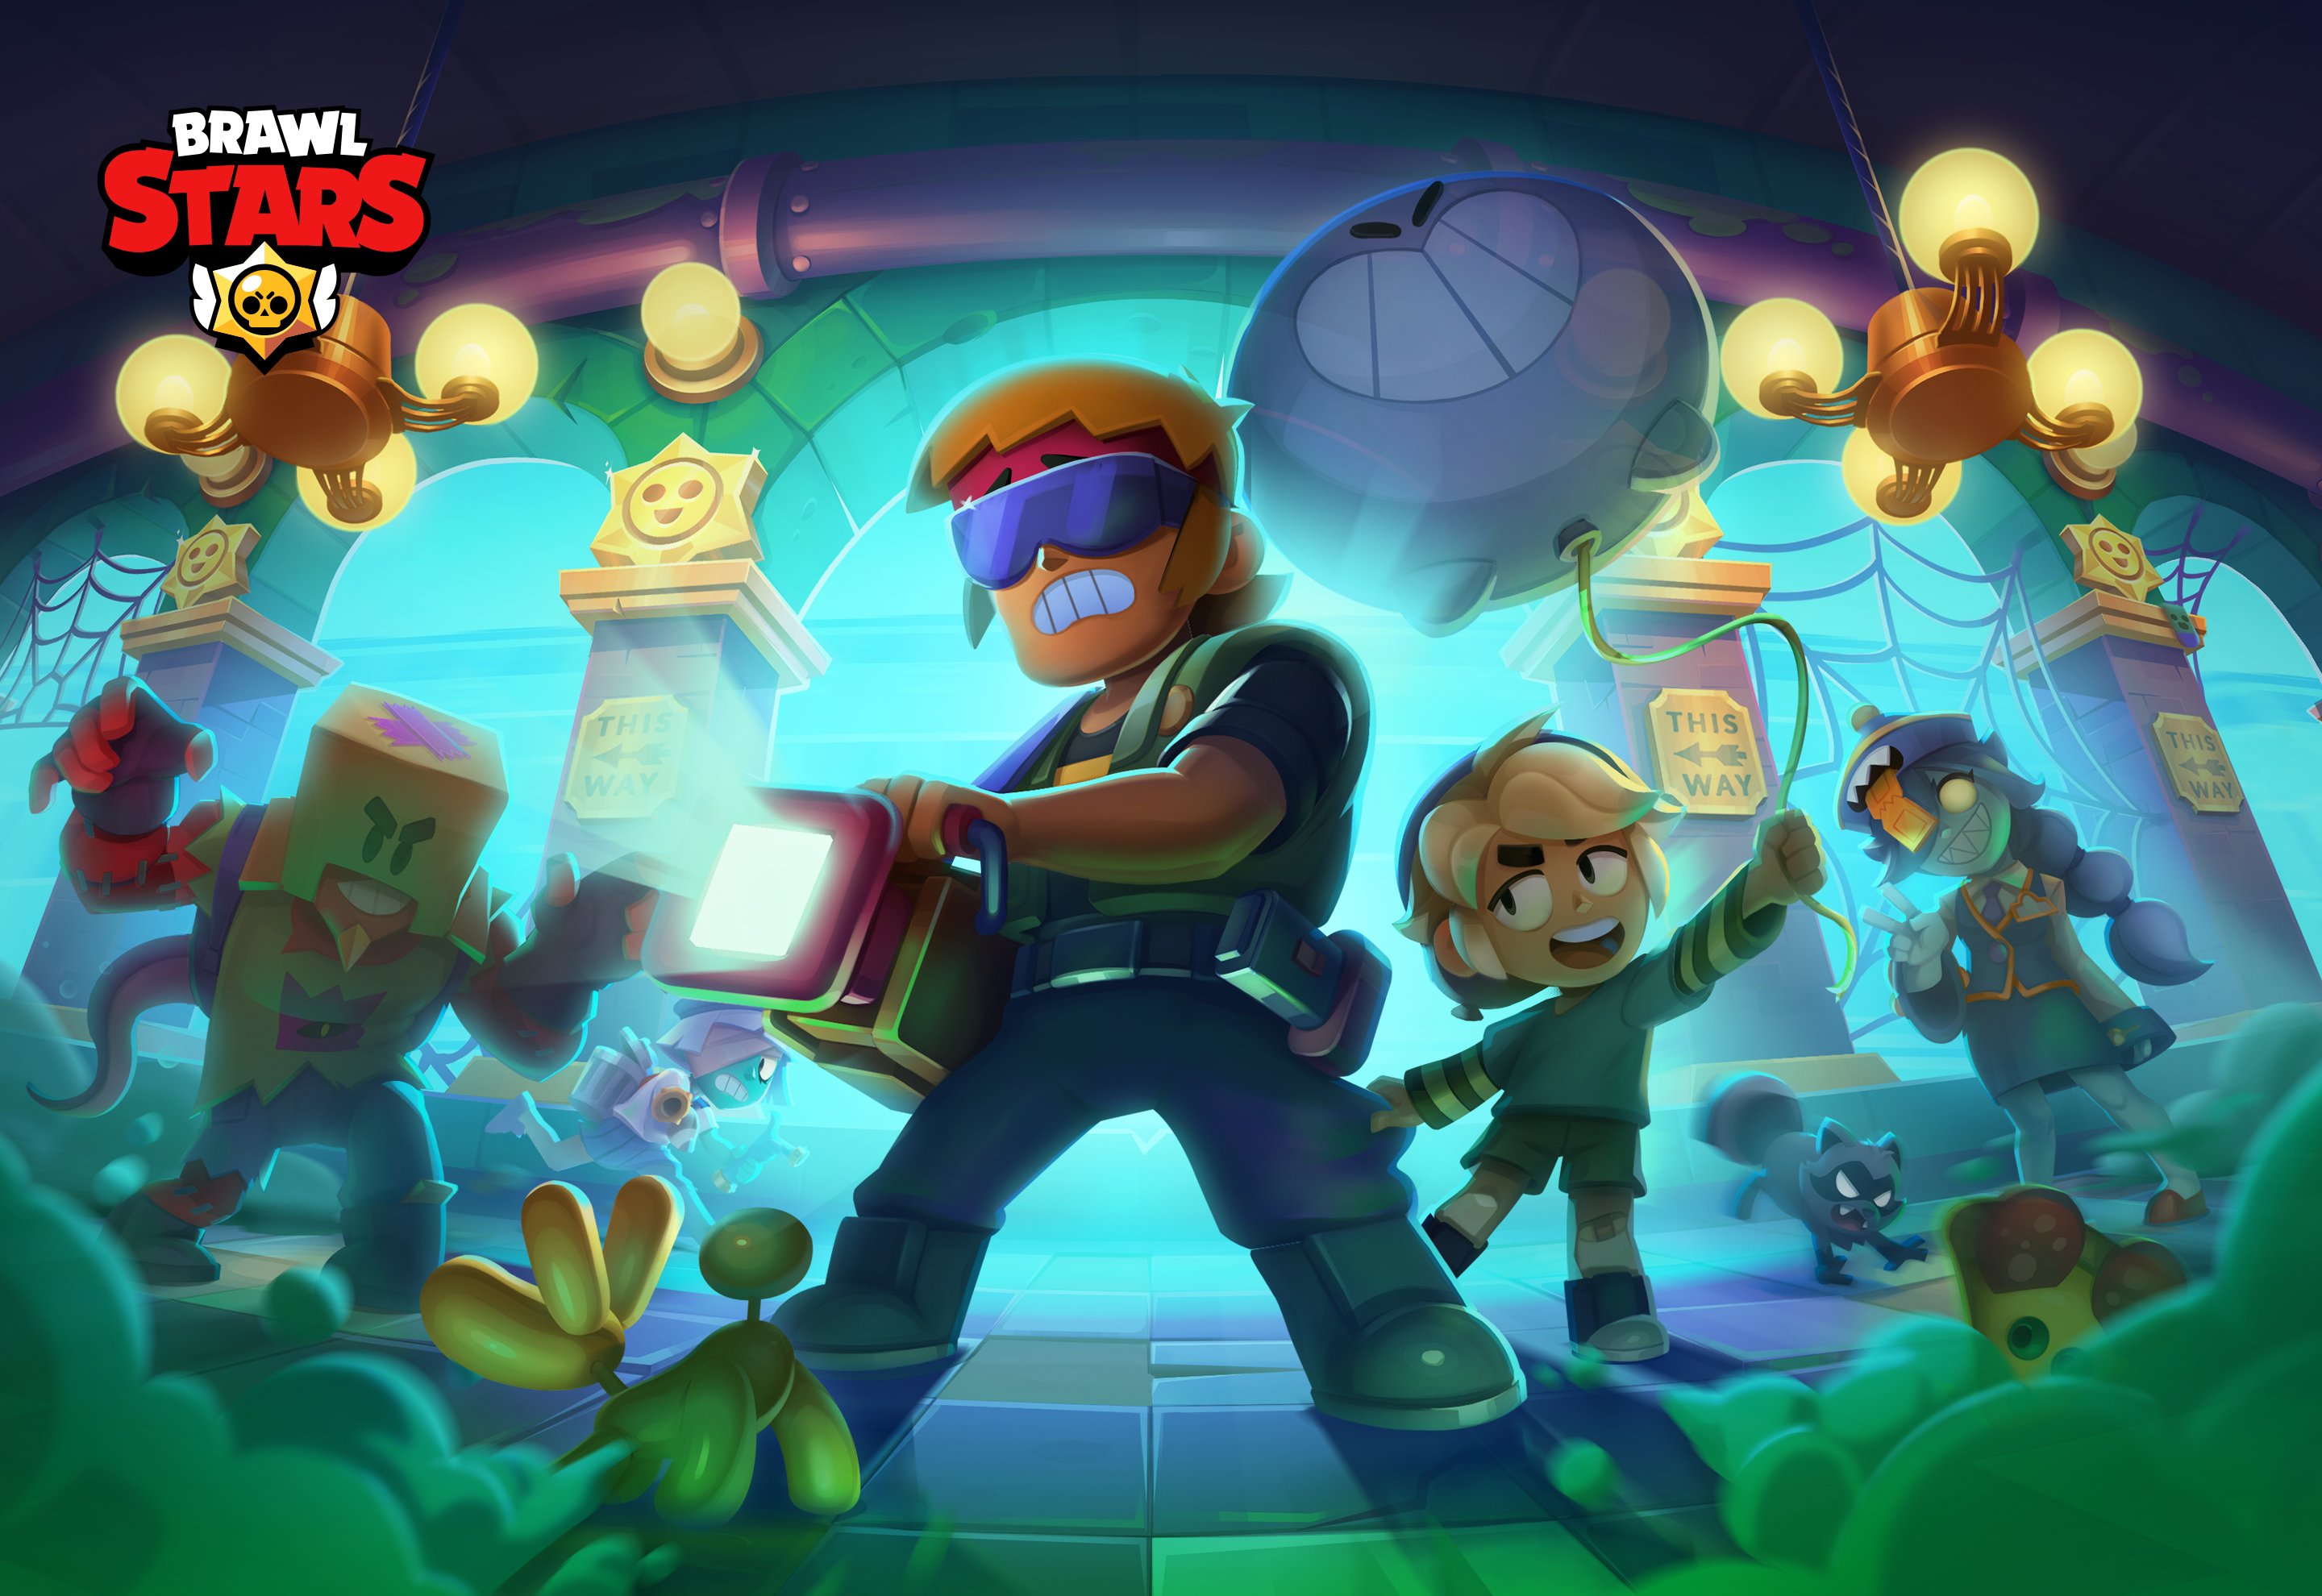 Here are the sneak peeks announced during the World Finals : r/Brawlstars